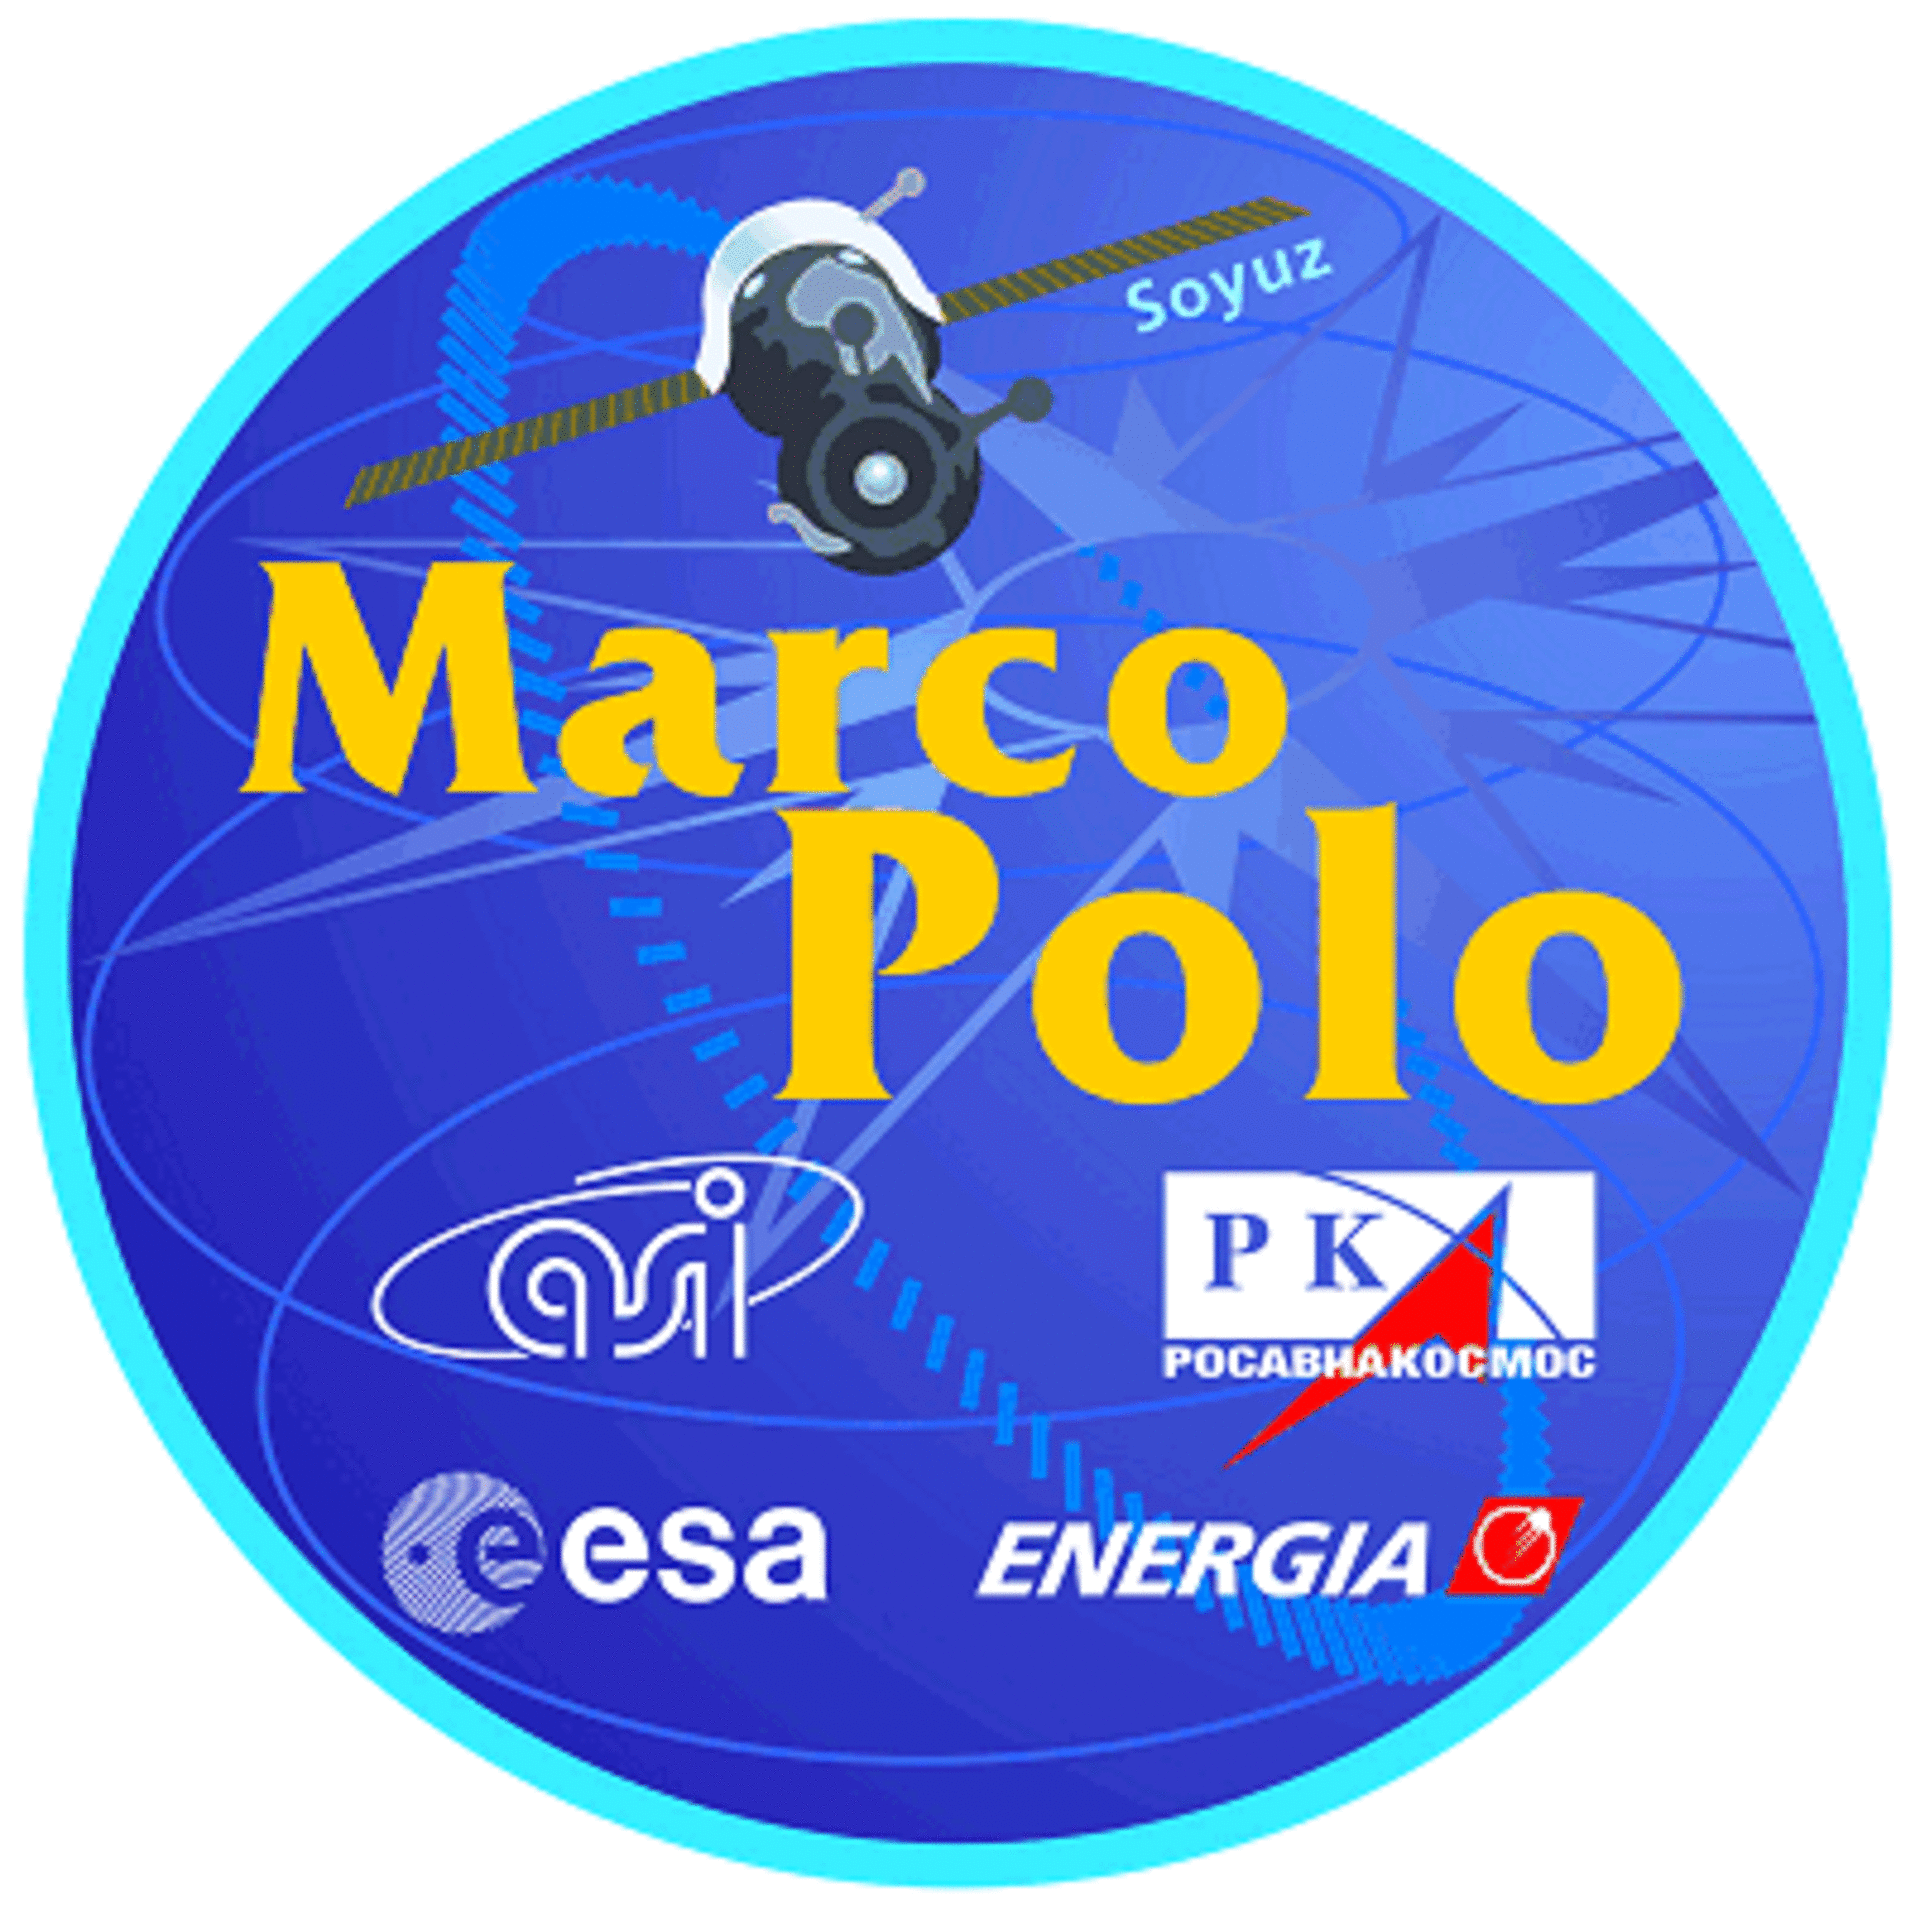 Marco Polo project logo